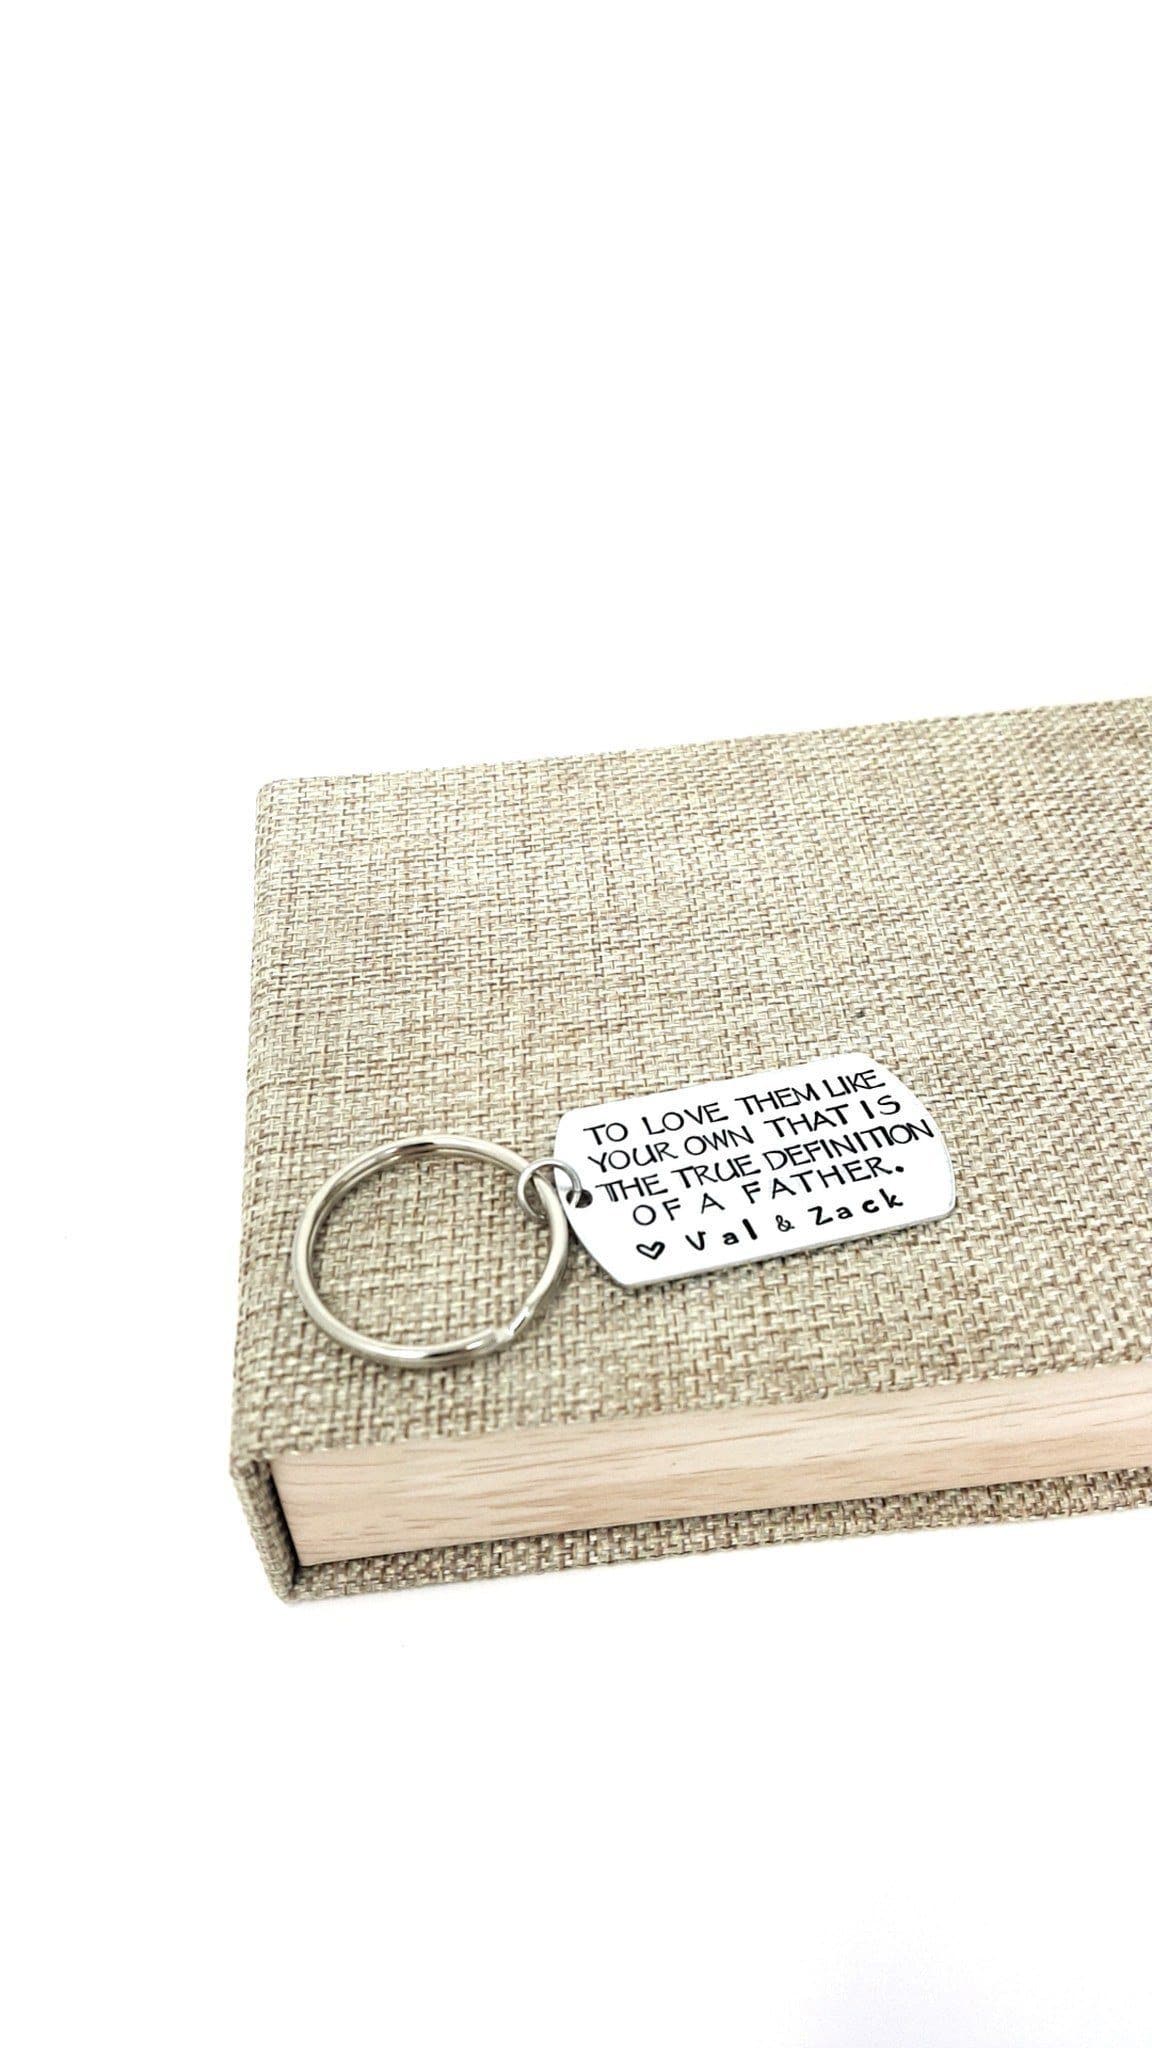 Stepfather Gift, Step Dad Keychain,  Step Dad Gift, Thank You Keychain, Father's Day, Father Gift, Keychains, HandmadeLoveStories, HandmadeLoveStories , [Handmade_Love_Stories], [Hand_Stamped_Jewelry], [Etsy_Stamped_Jewelry], [Etsy_Jewelry]